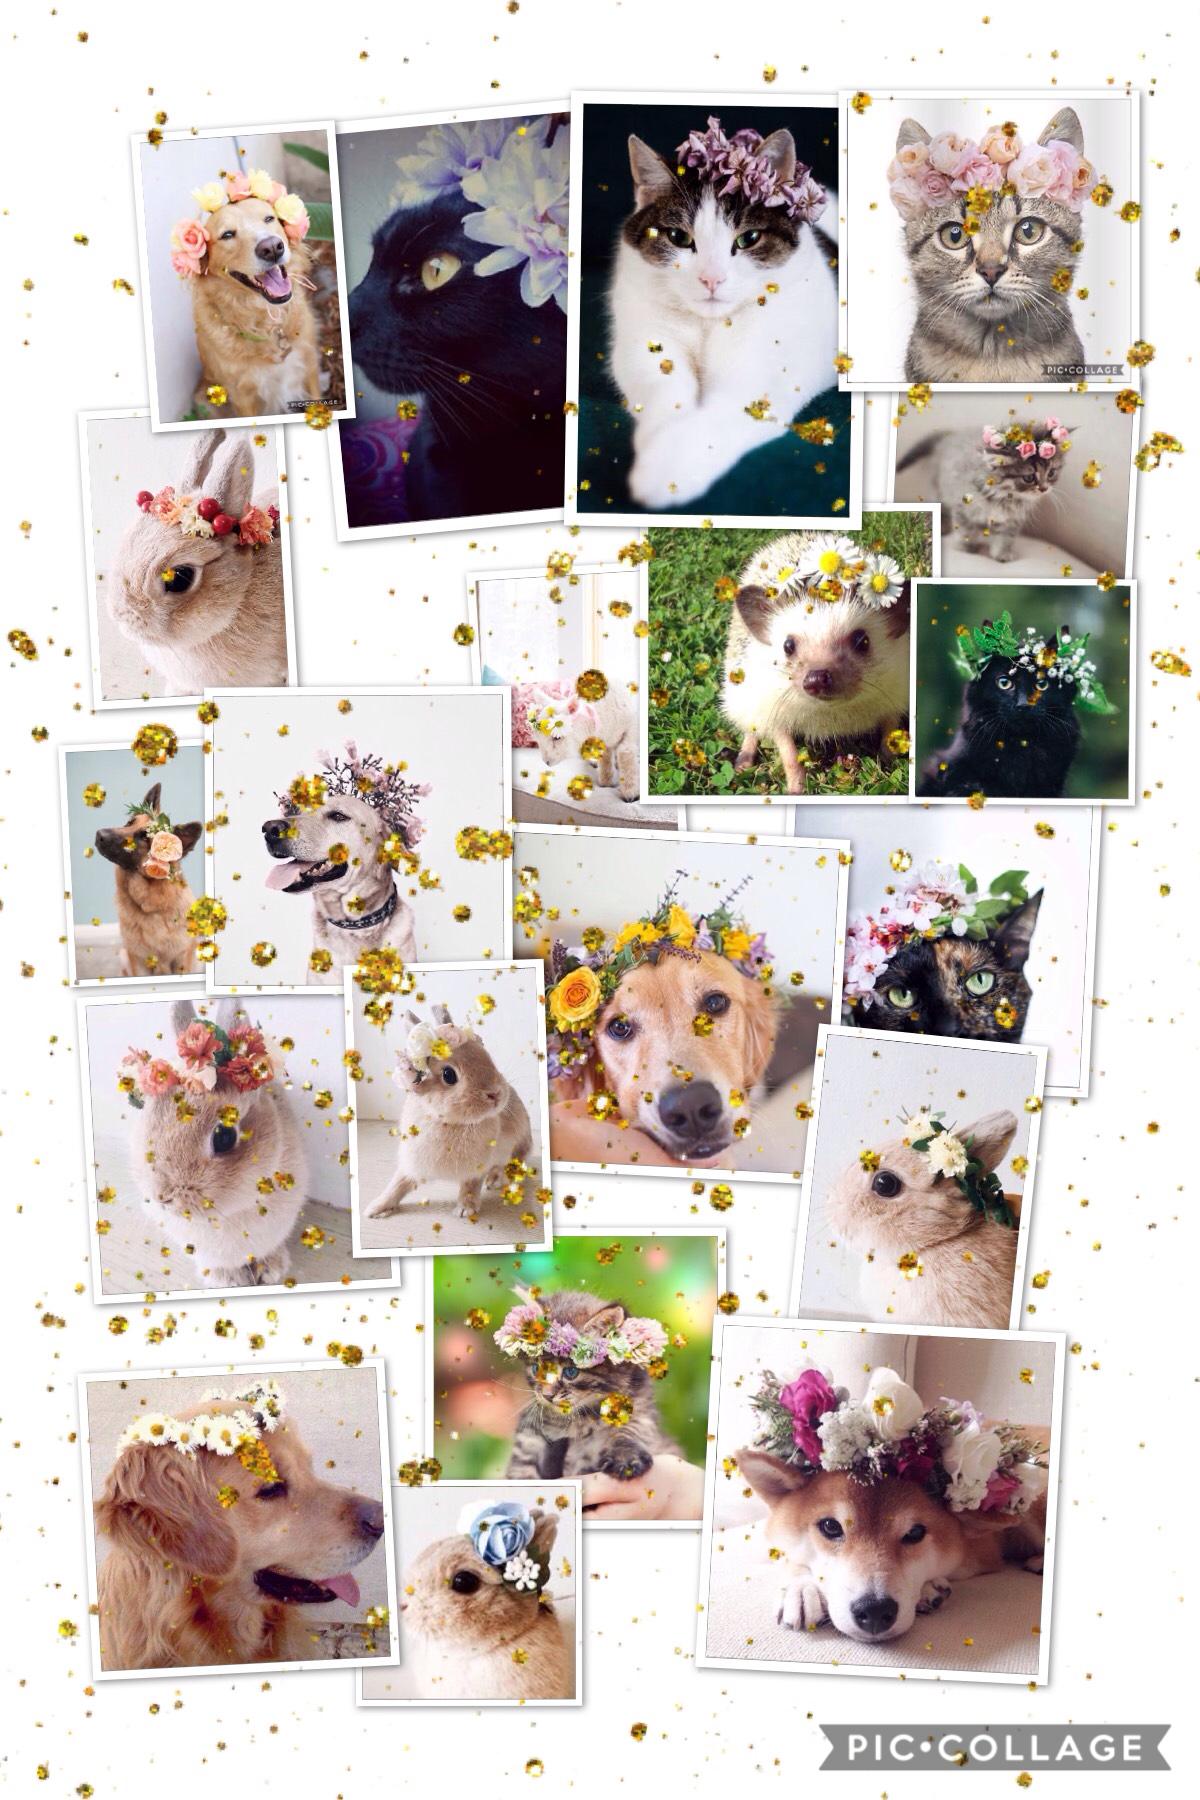 Go follow flowercrowns-on-animals! The pics that are posted are gorgeous! These are just a few of them! FYI, I will have a contest on my extras page... be sure to join when it comes out!